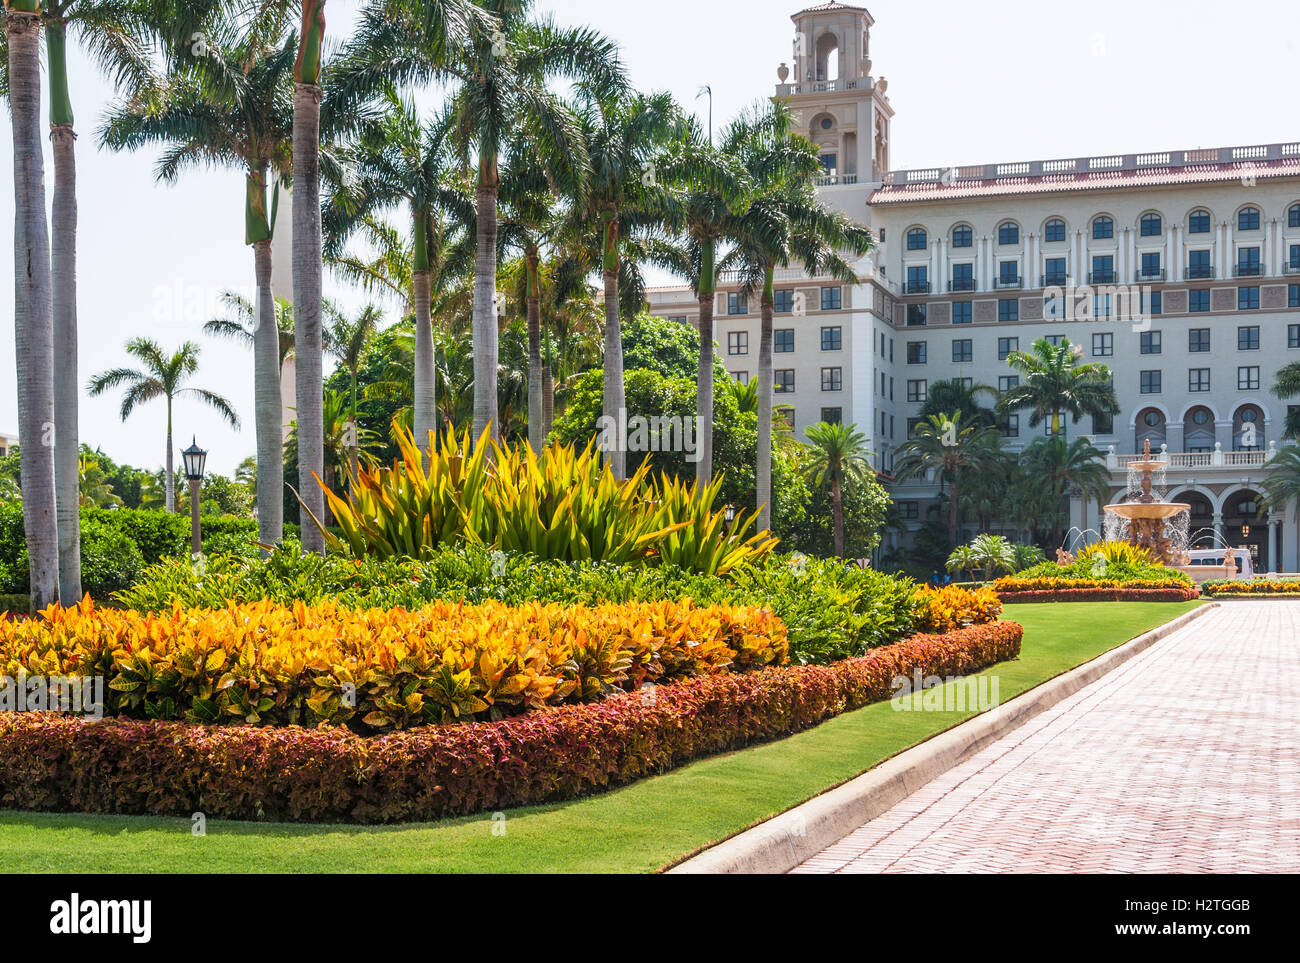 Grand entry to the historic and luxurious Breakers resort hotel in Palm Beach, Florida. (USA) Stock Photo